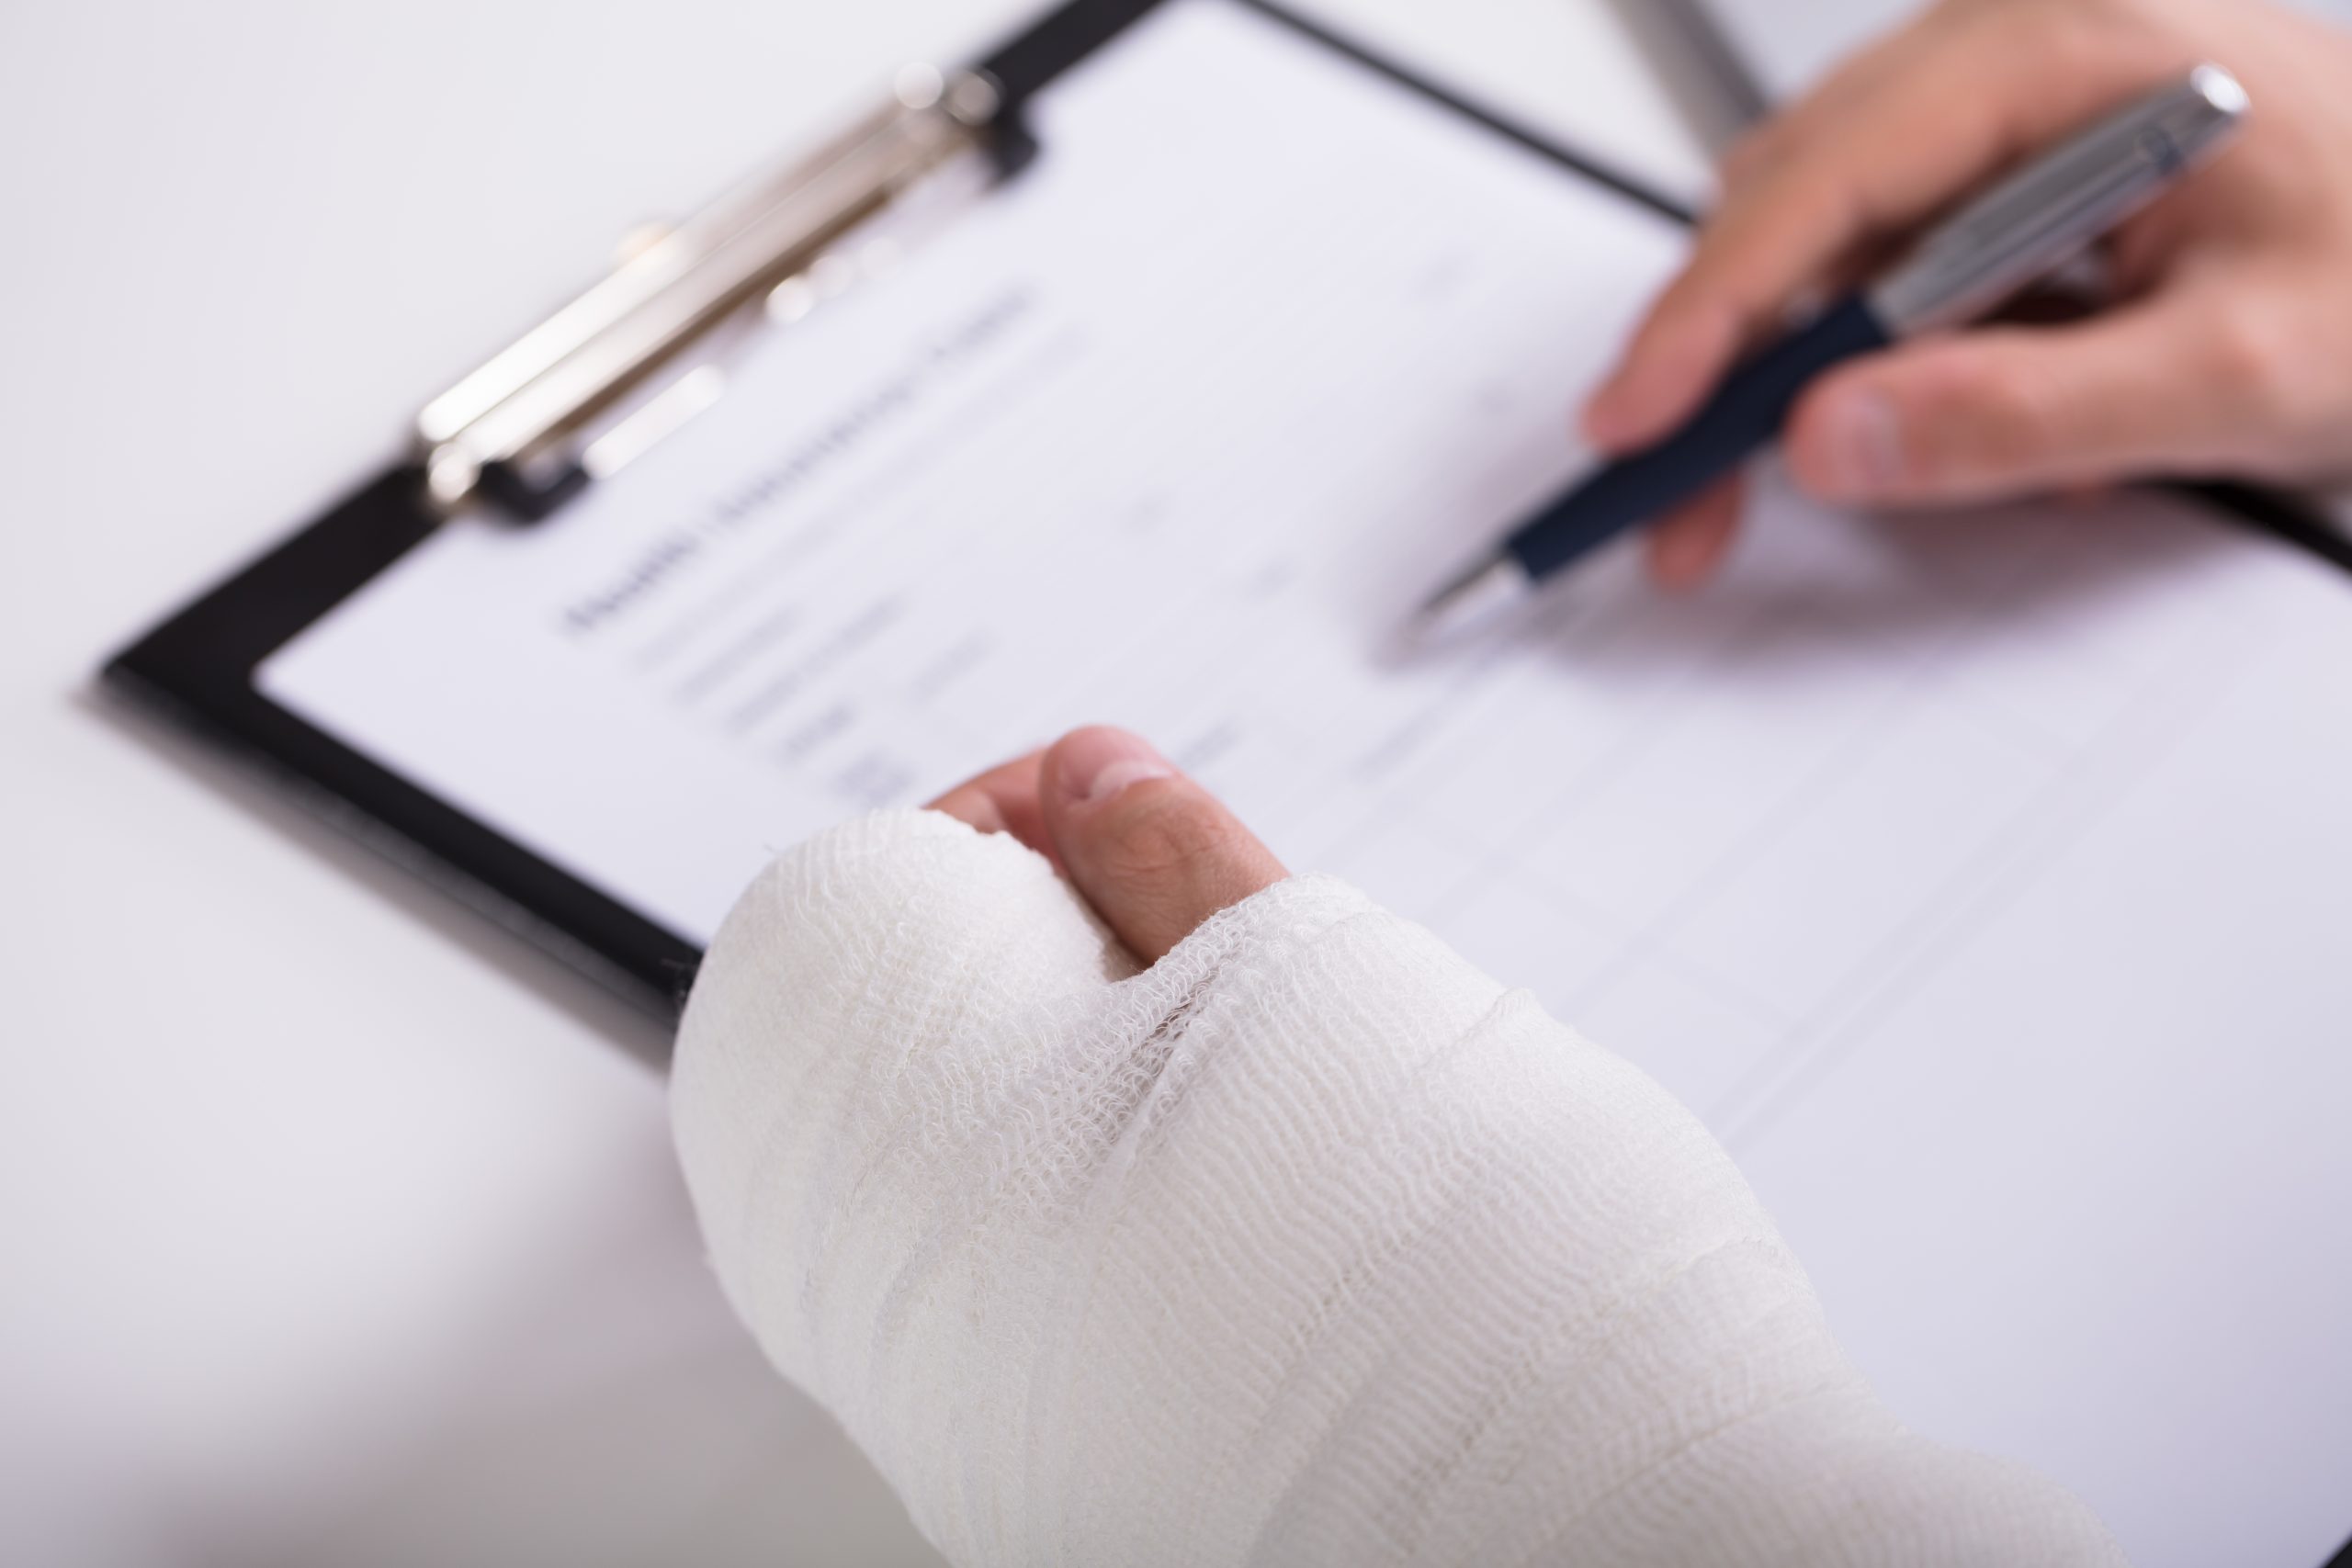 A broken left hand in a cast and a right hand filling out a form. This image is featured on the Passive Income MD blog in a partnership post with Pattern. Get your disability insurance through Pattern, especially if you're a physician. You can get started here: https://www.patternlife.com/quote/physician-disability-insurance-quote-request?uclickid=ebmti5e4b33a3821e8674872457&campid=481226&utm_source=&utm_medium=&utm_campaign=&utm_term=&utm_content=